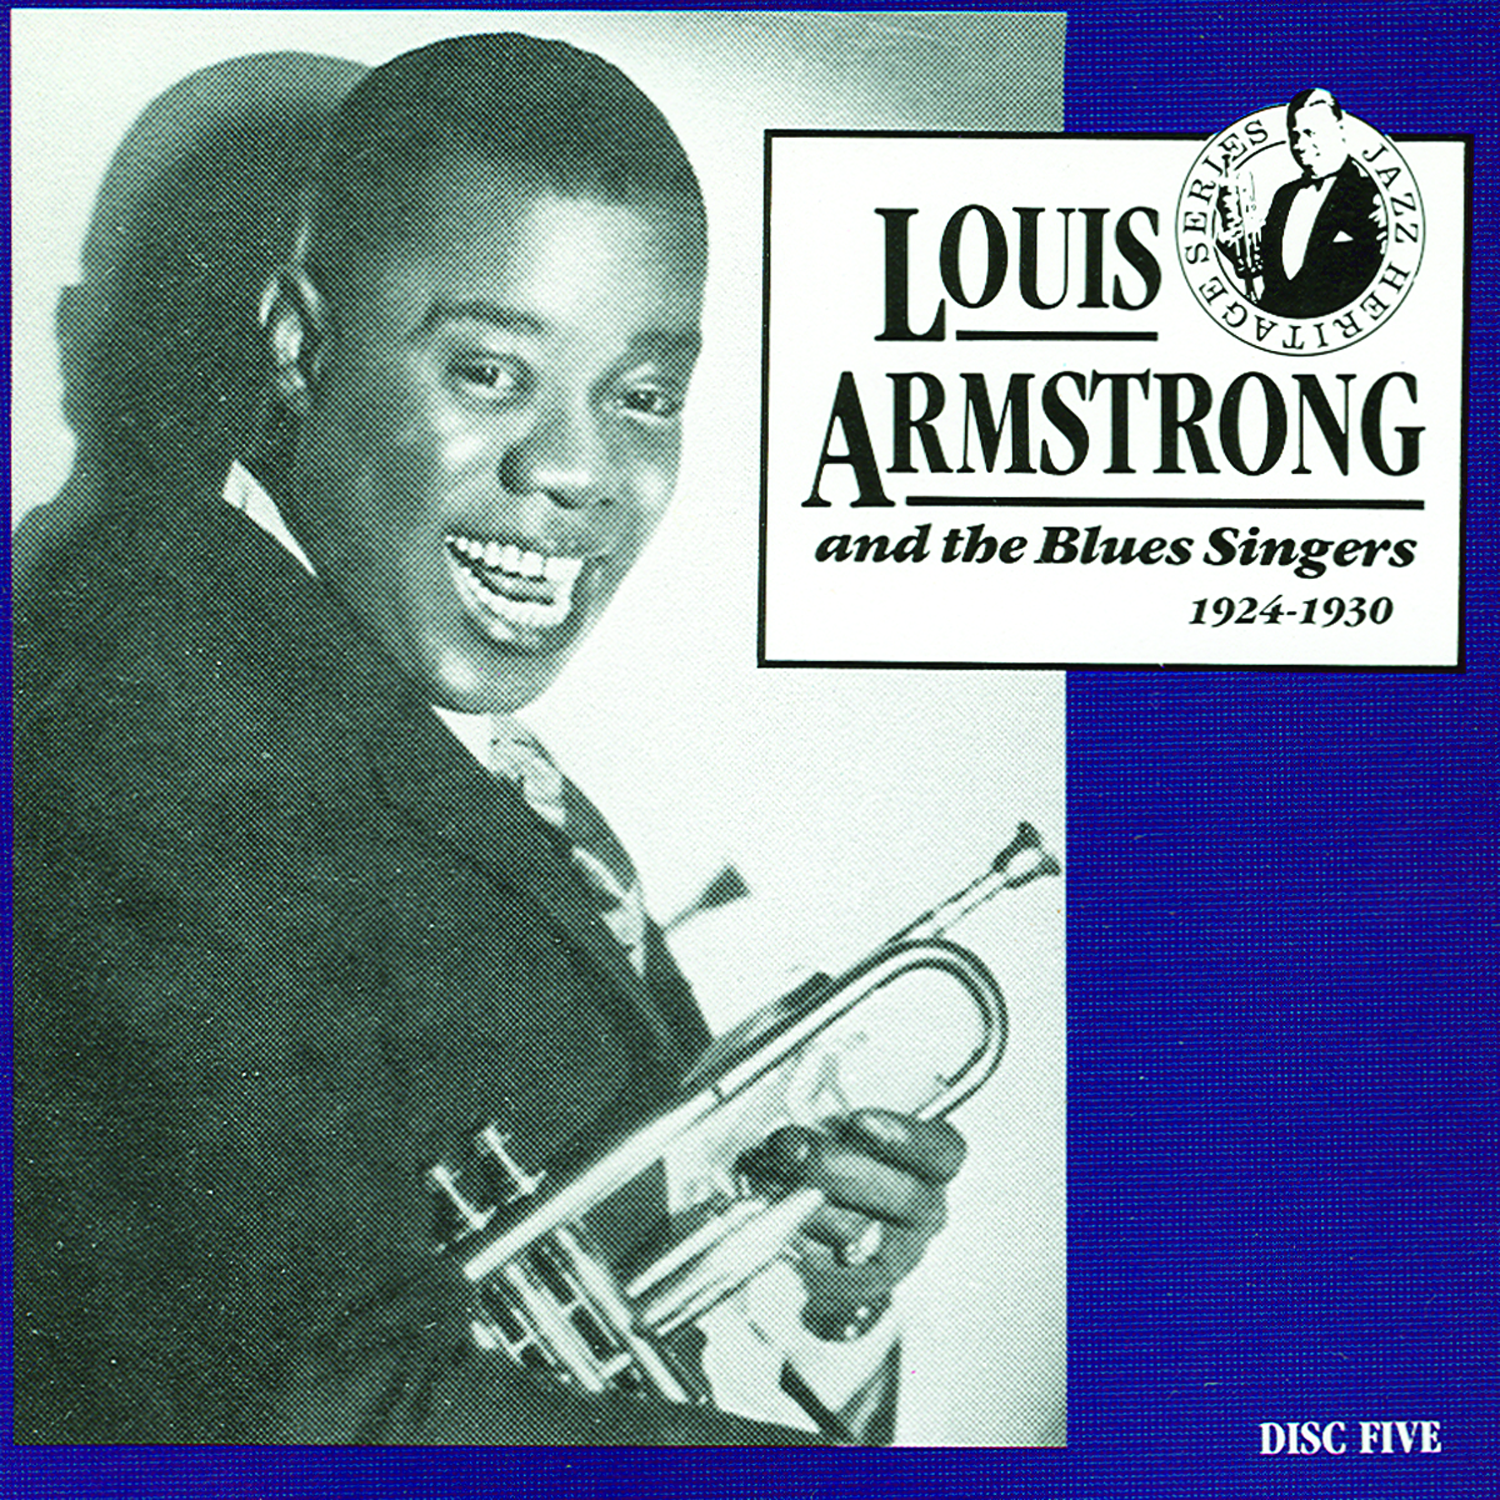 Louis Armstrong And The Blues Singers, 1924 - 1930 CD5